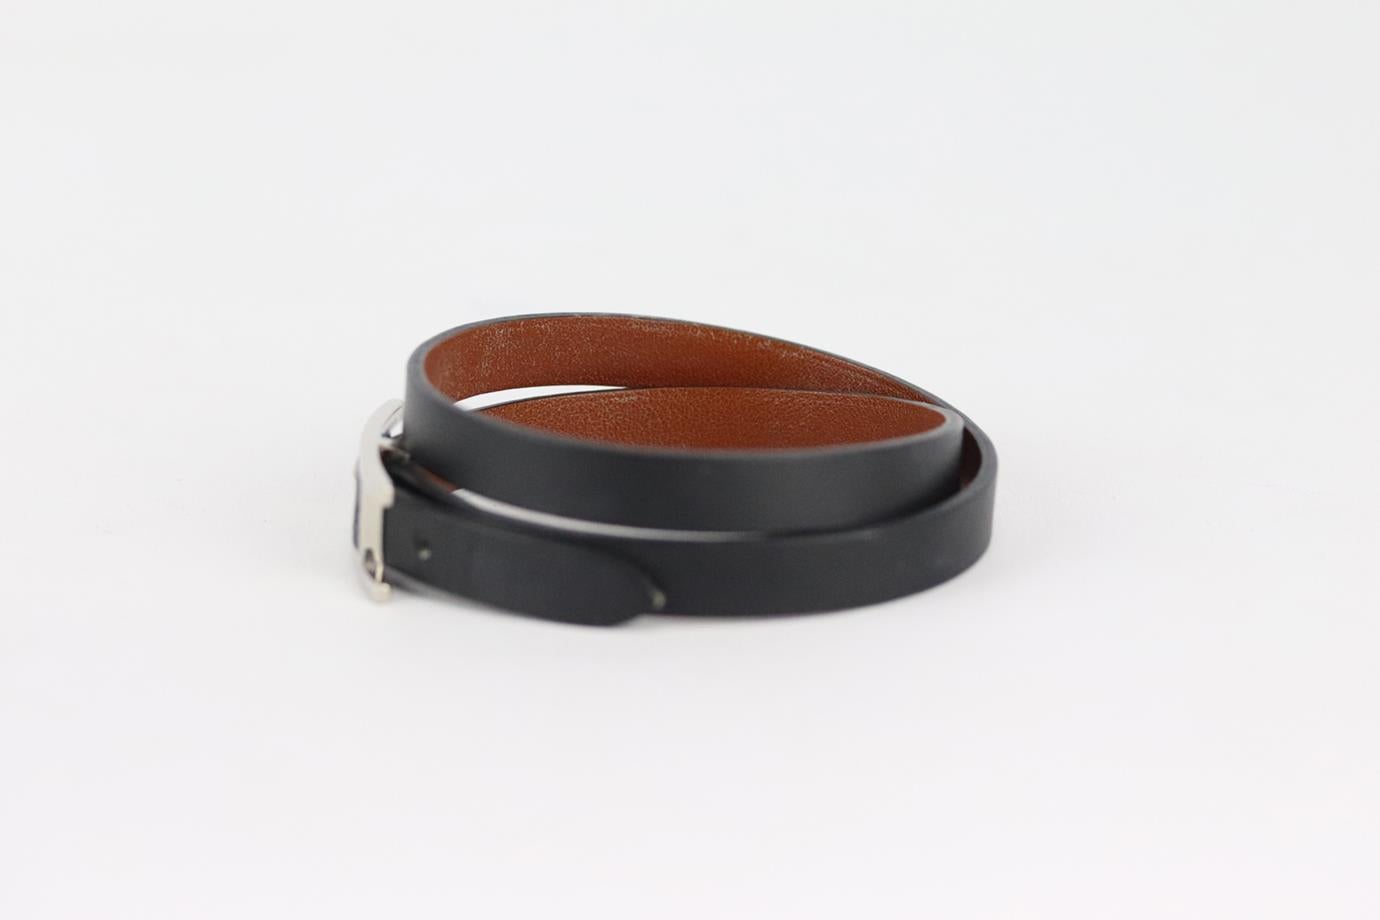 Hermès Behapi double tour leather bracelet. Black and silver. Buckle fastening at front. Does not come with box or dustbag. Length: 16.5 in. Very good condition - Light signs of wear; see pictures.
